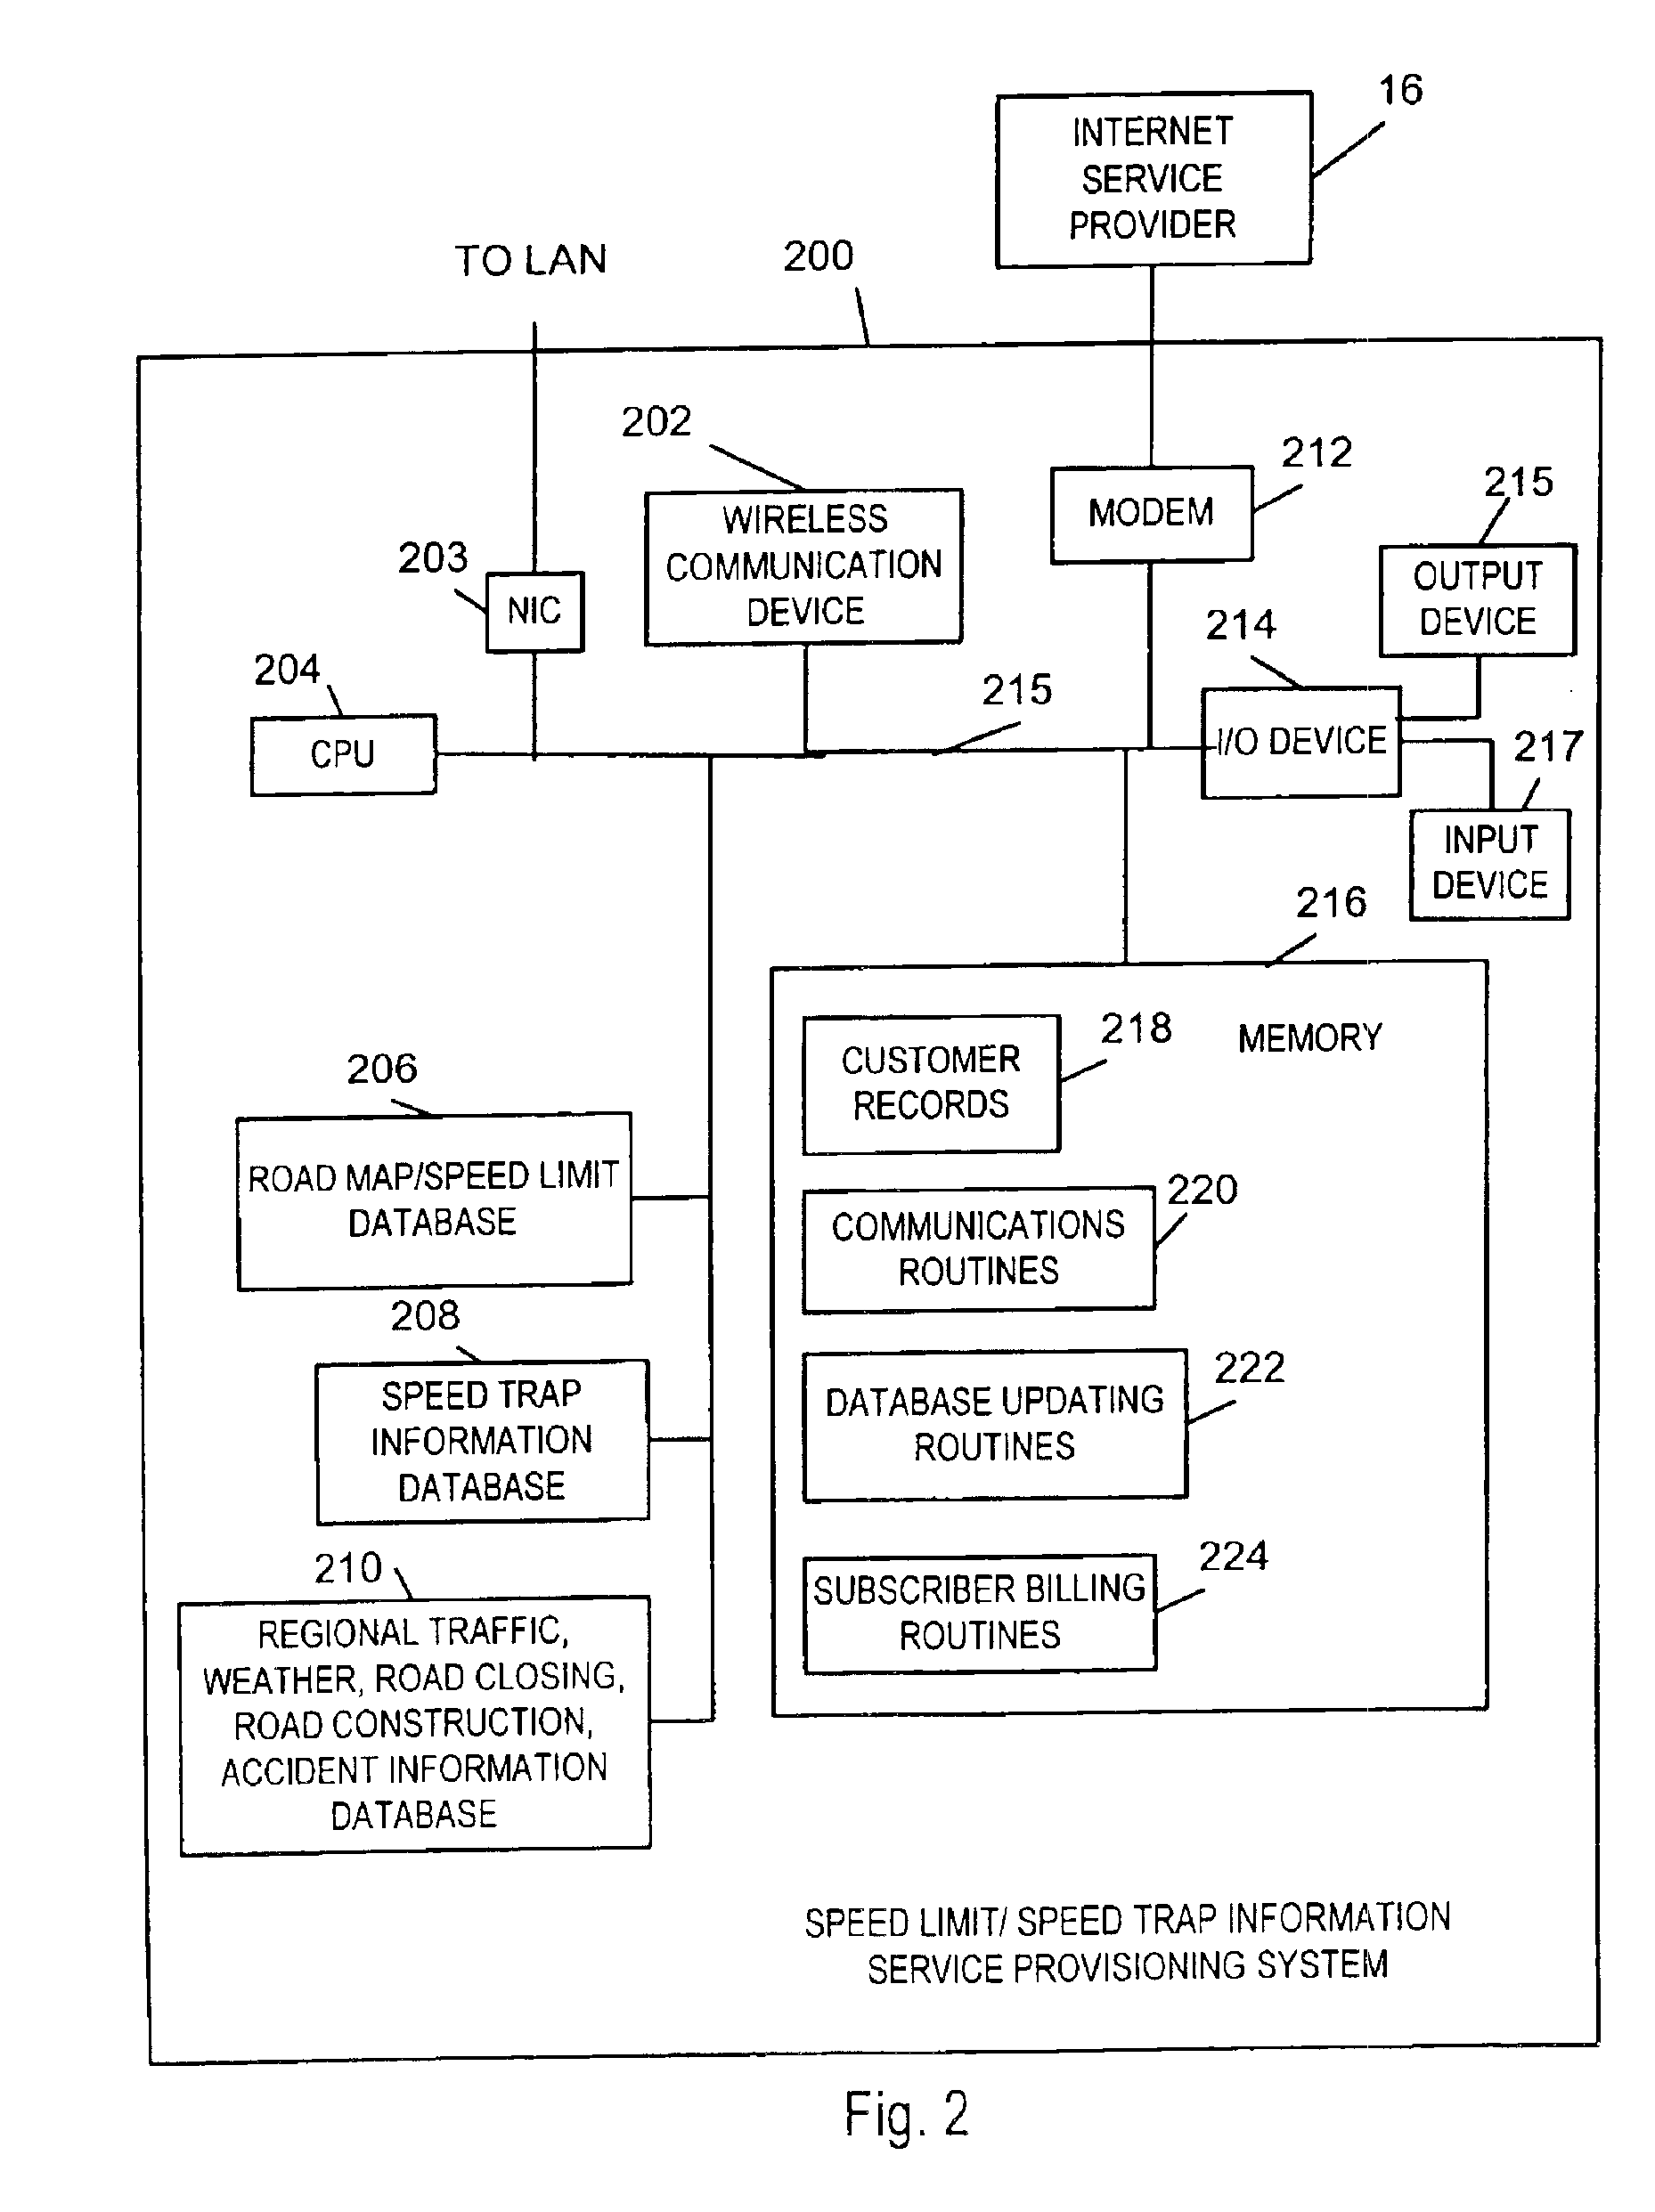 Methods and apparatus for storing, accessing, generating and using information about speed limits and speed traps